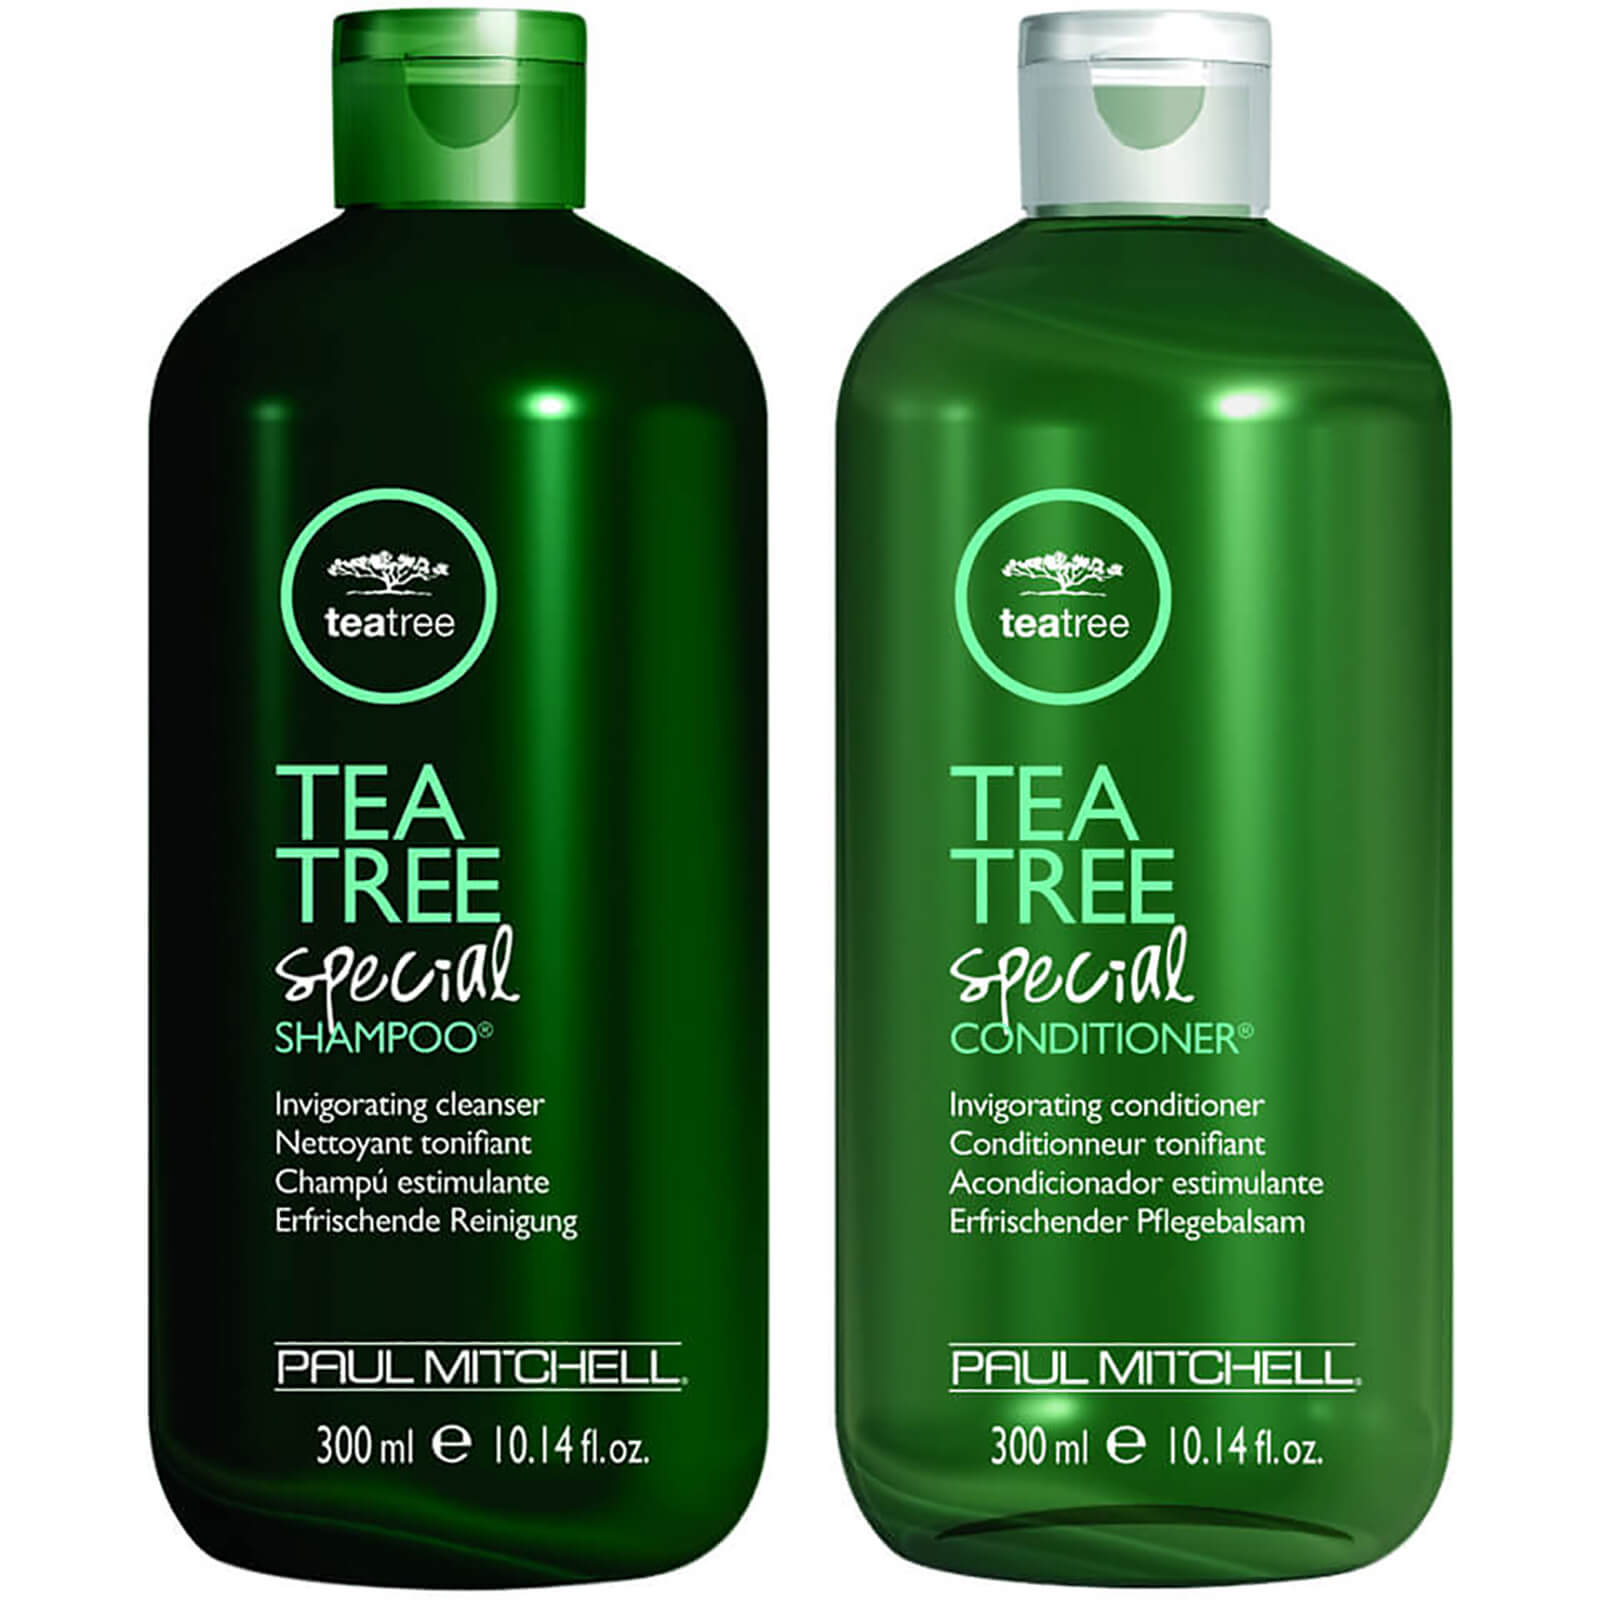 Paul Mitchell Tea Tree Special Shampoo and Conditioner Duo